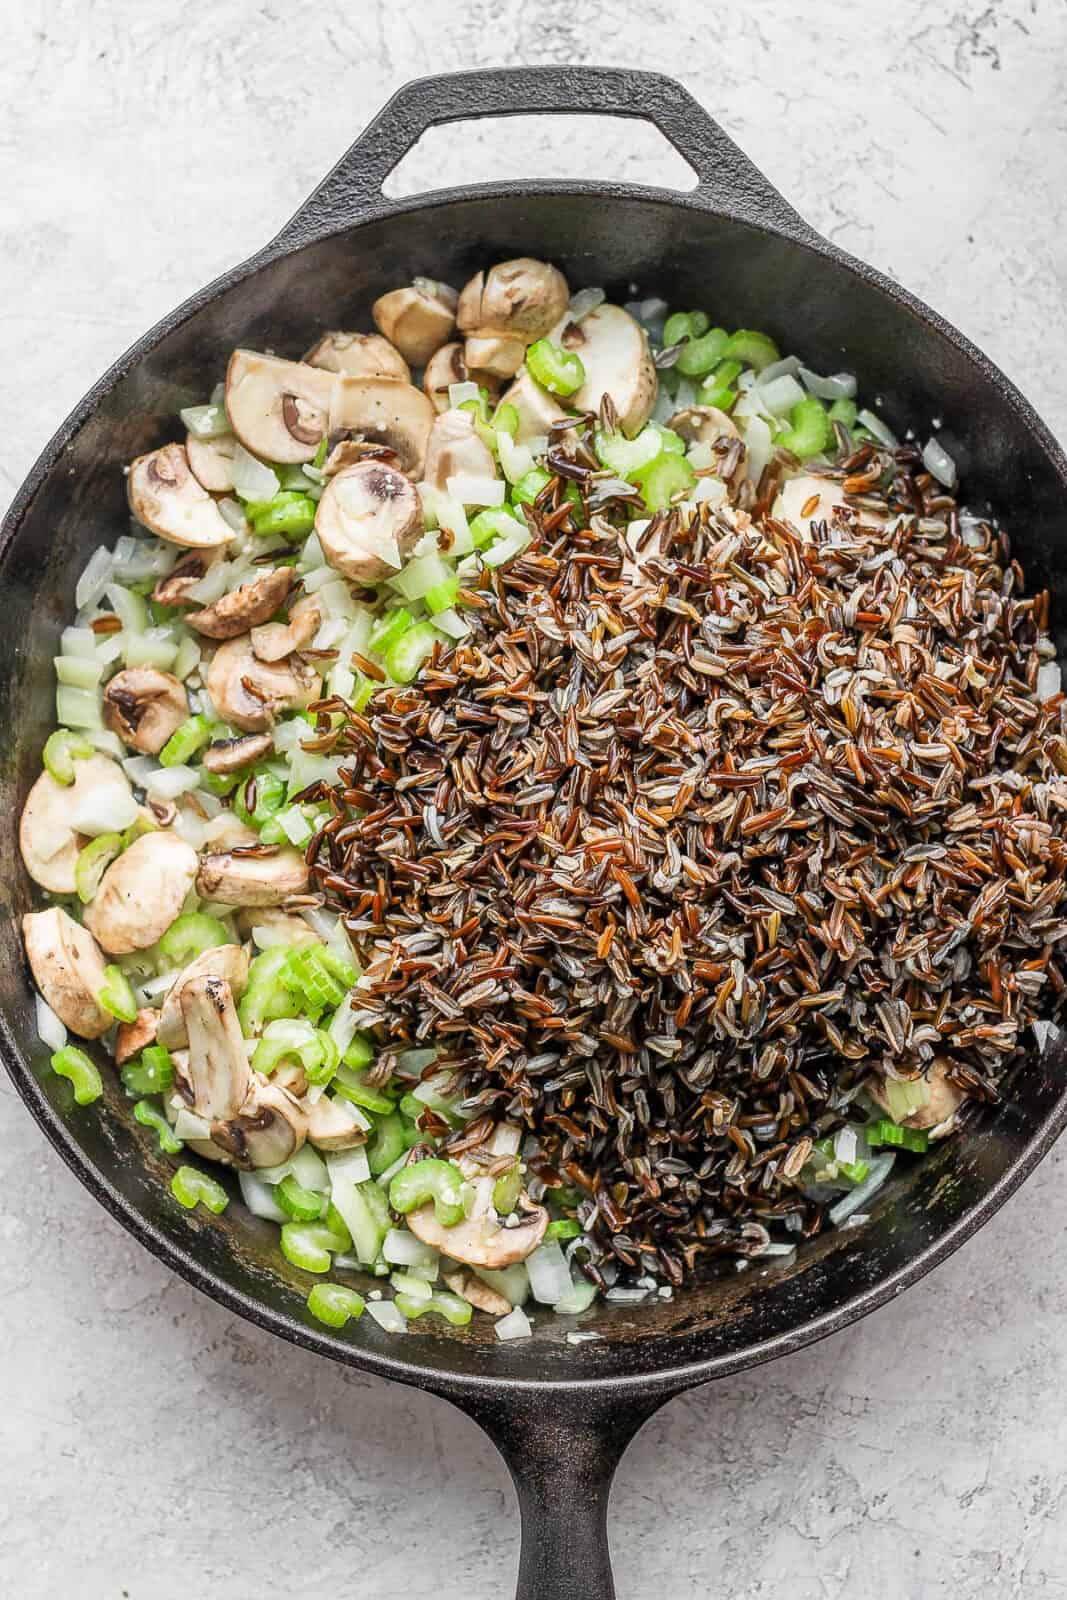 Cast iron skillet with onion mixture, mushrooms, and cooked wild rice.